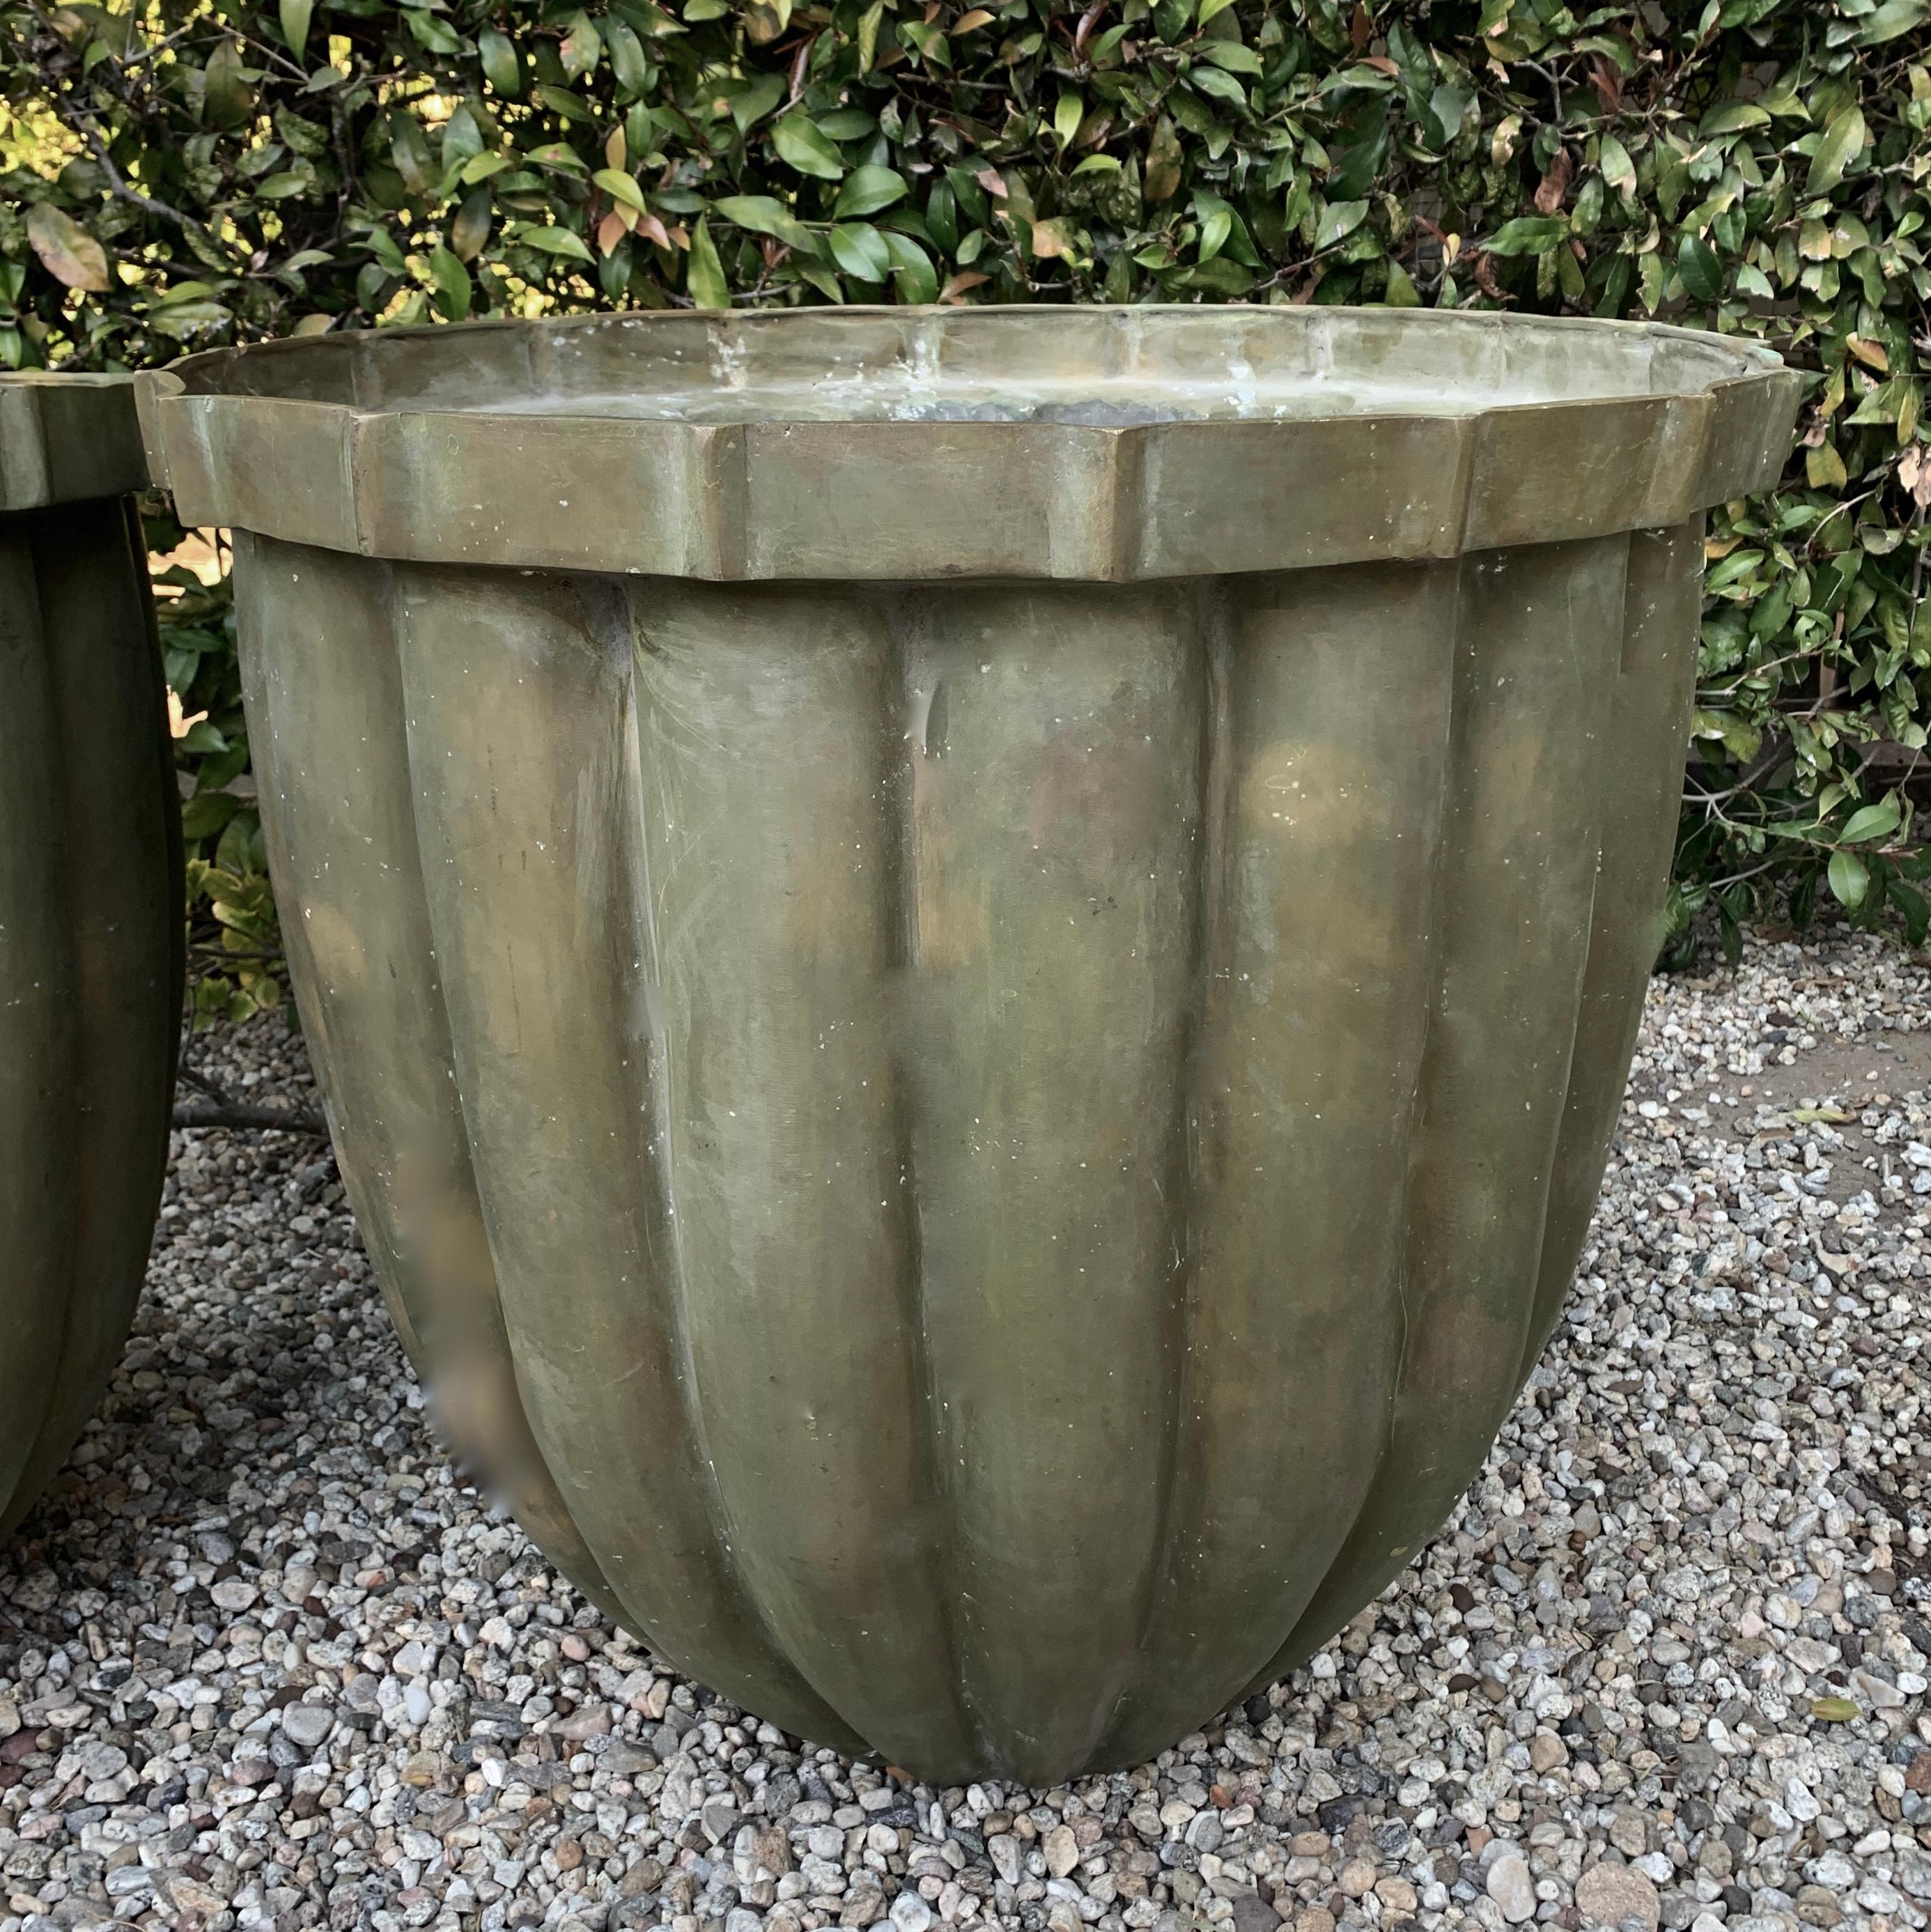 A monumental pair of solid bronze patinated fluted planters. The pair are a stunning pair and beautifully designed - a compliment to many spaces, from outdoor gardens to interiors. The planters are very large and heavy, they do not currently have